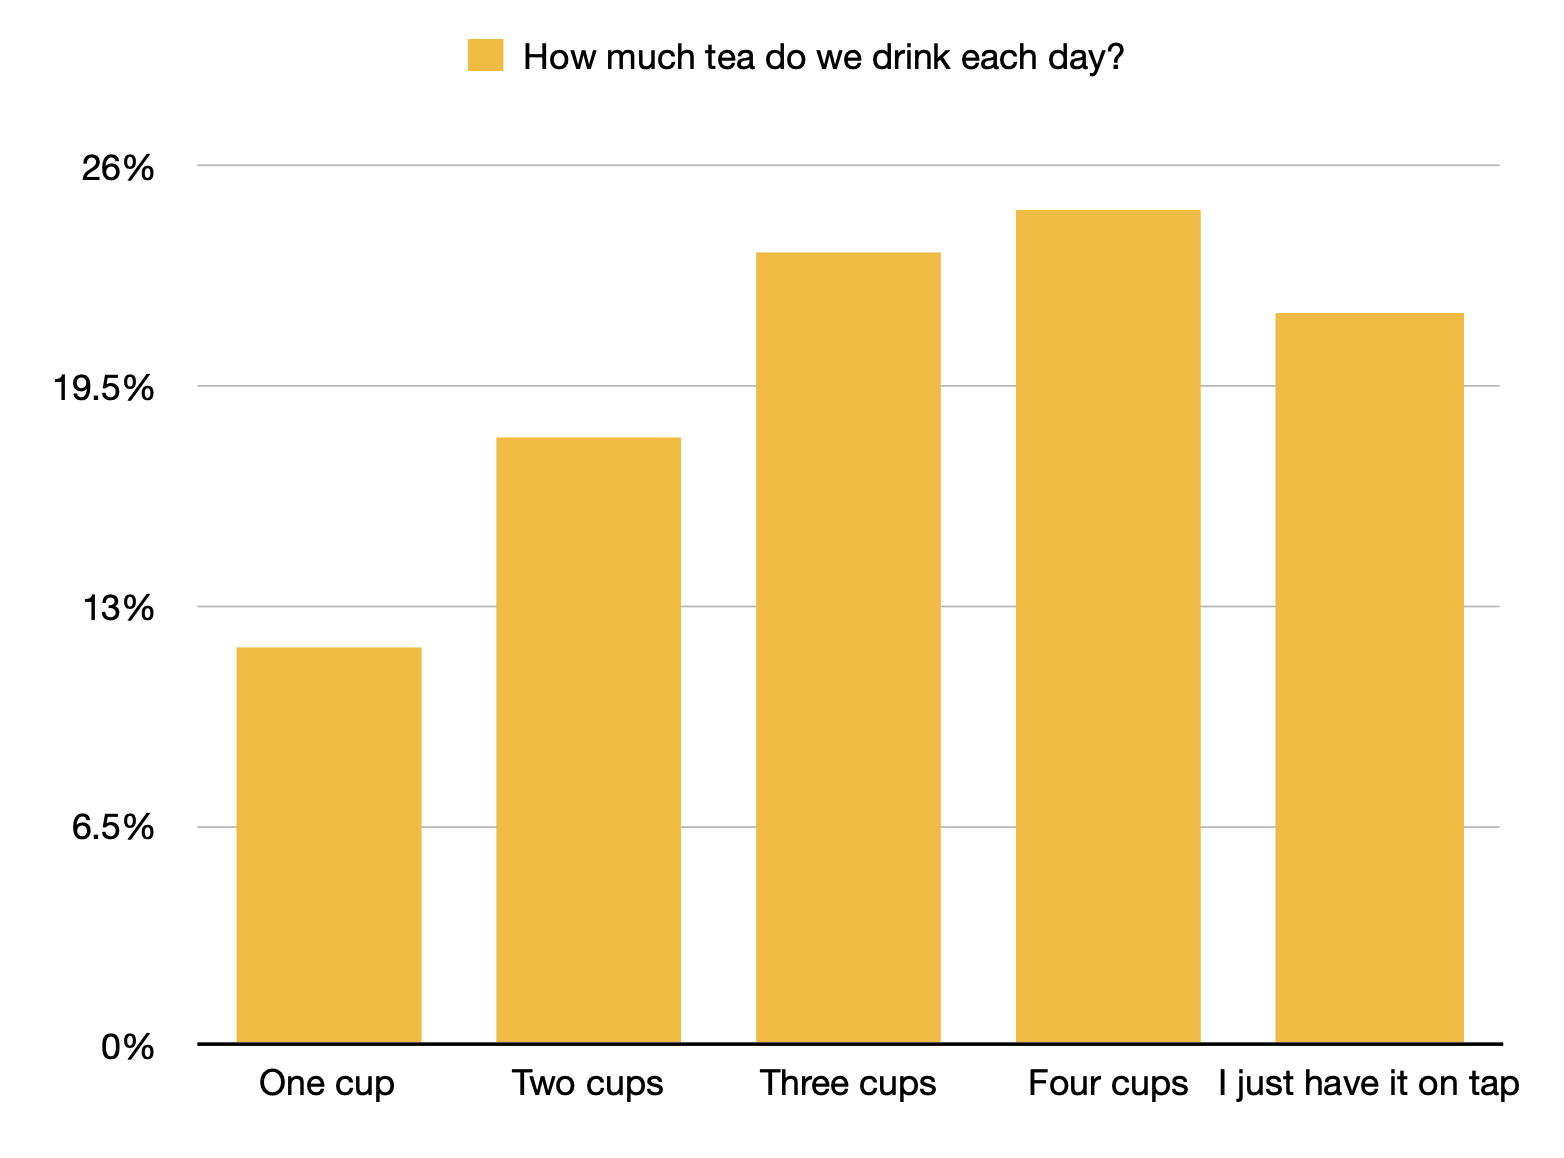 How much tea do we drink each day